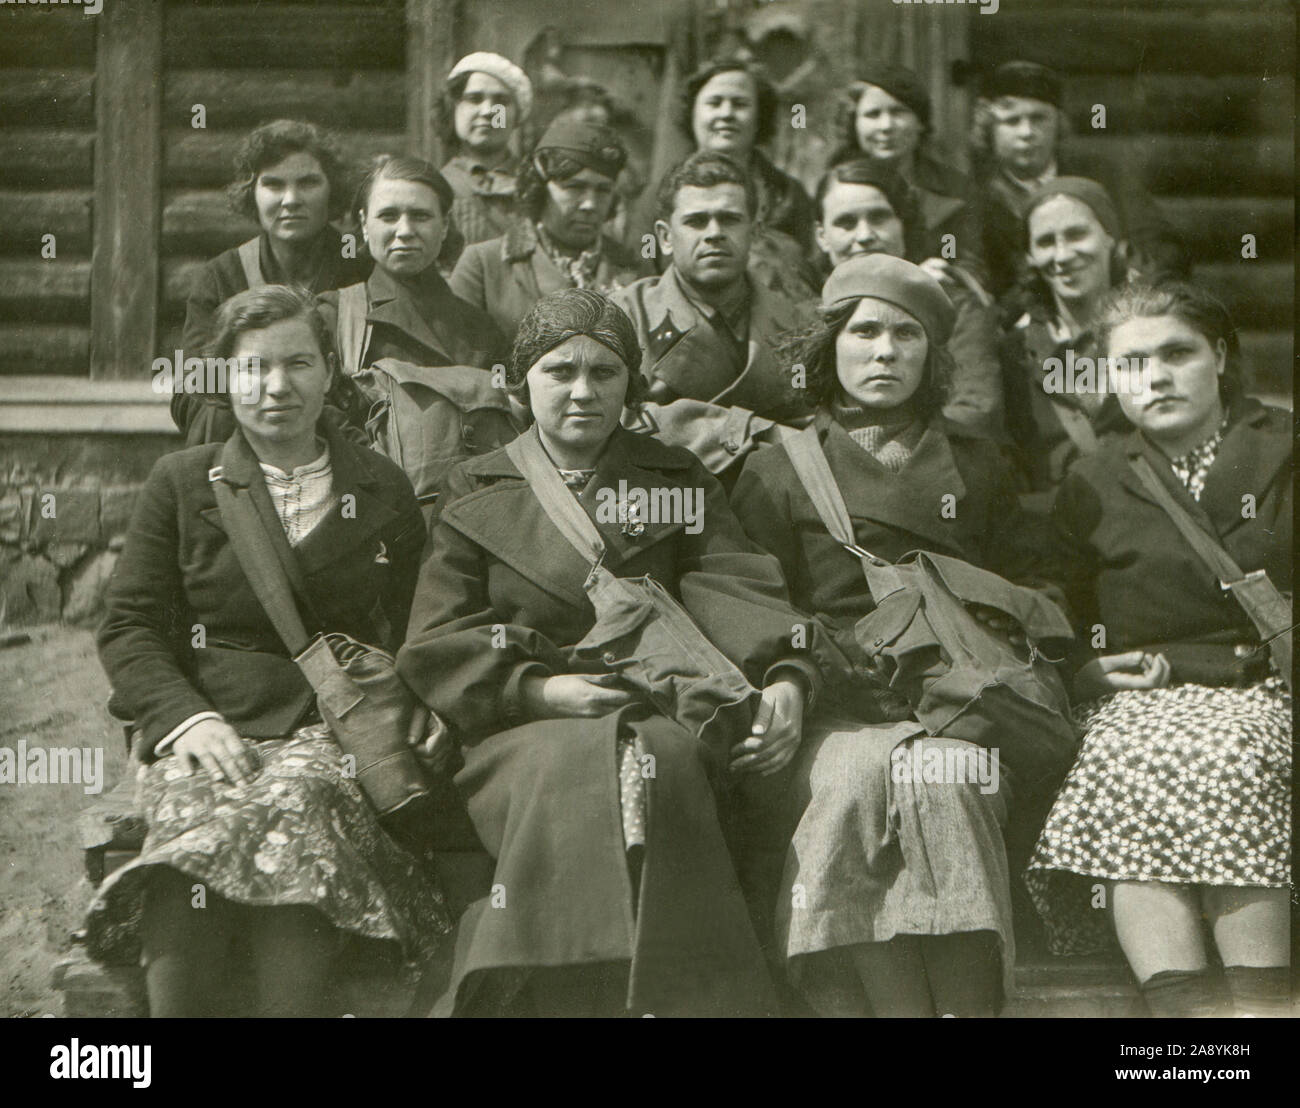 1937 year. Military garrison. The officer of the Red Army, along with the wives of the command staff, was photographed after the civil defense exercises. Women have bags with gas masks on their shoulders. THE USSR. Stock Photo